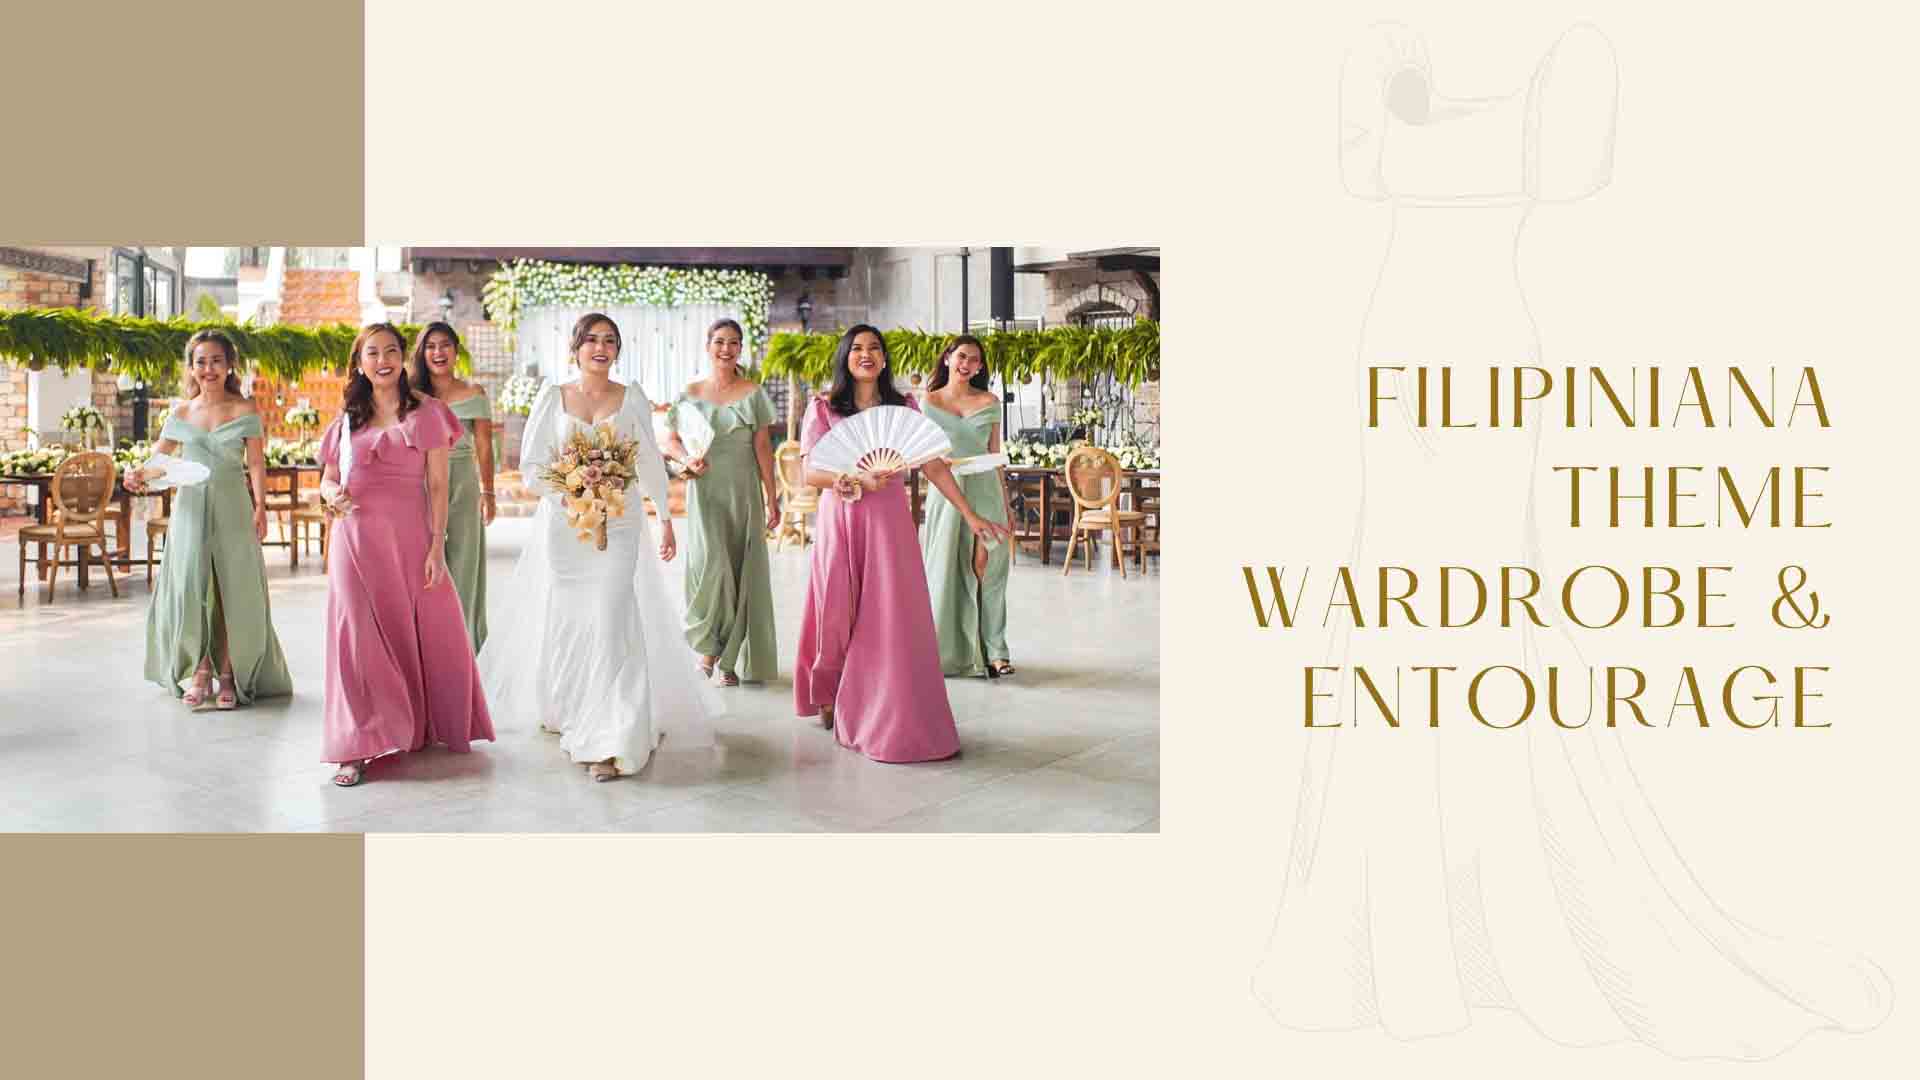 Town's Delight Catering & Events Filipinana Wedding Guide Philippines 3